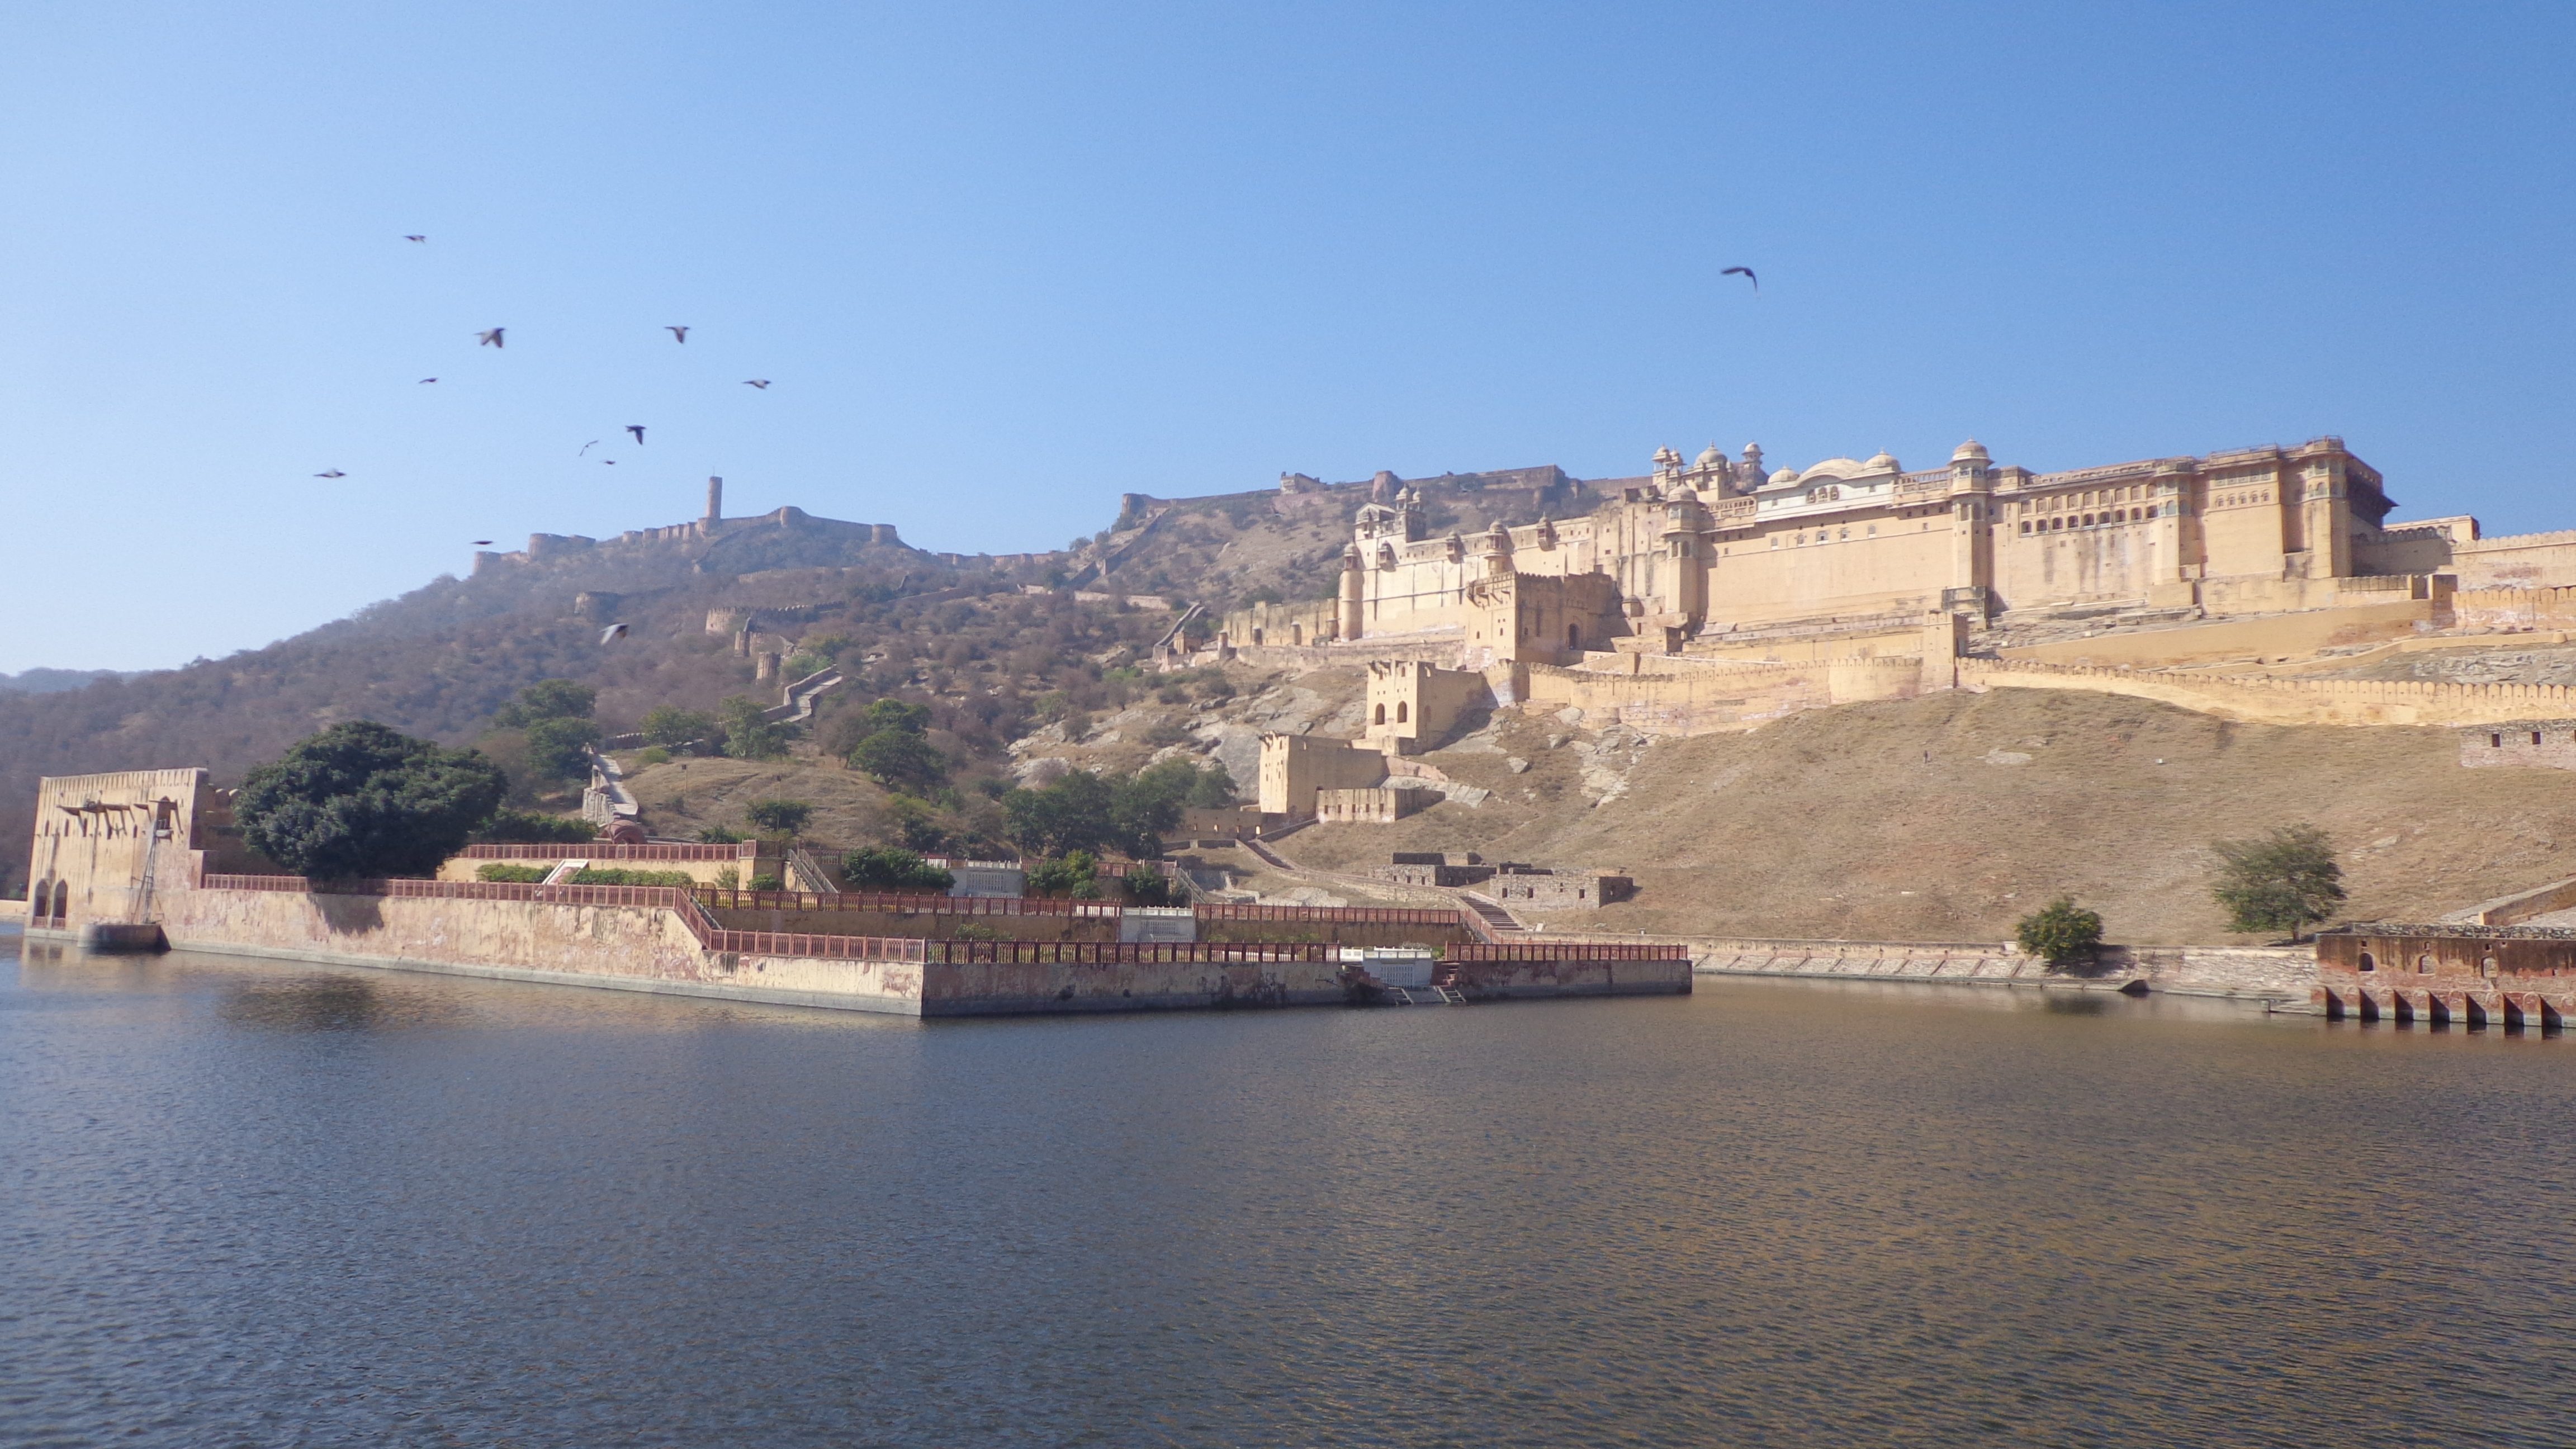 IMPOSING. Amer or Amber Fort is an imposing structure that was the center of power and line of defense in ancient times. 